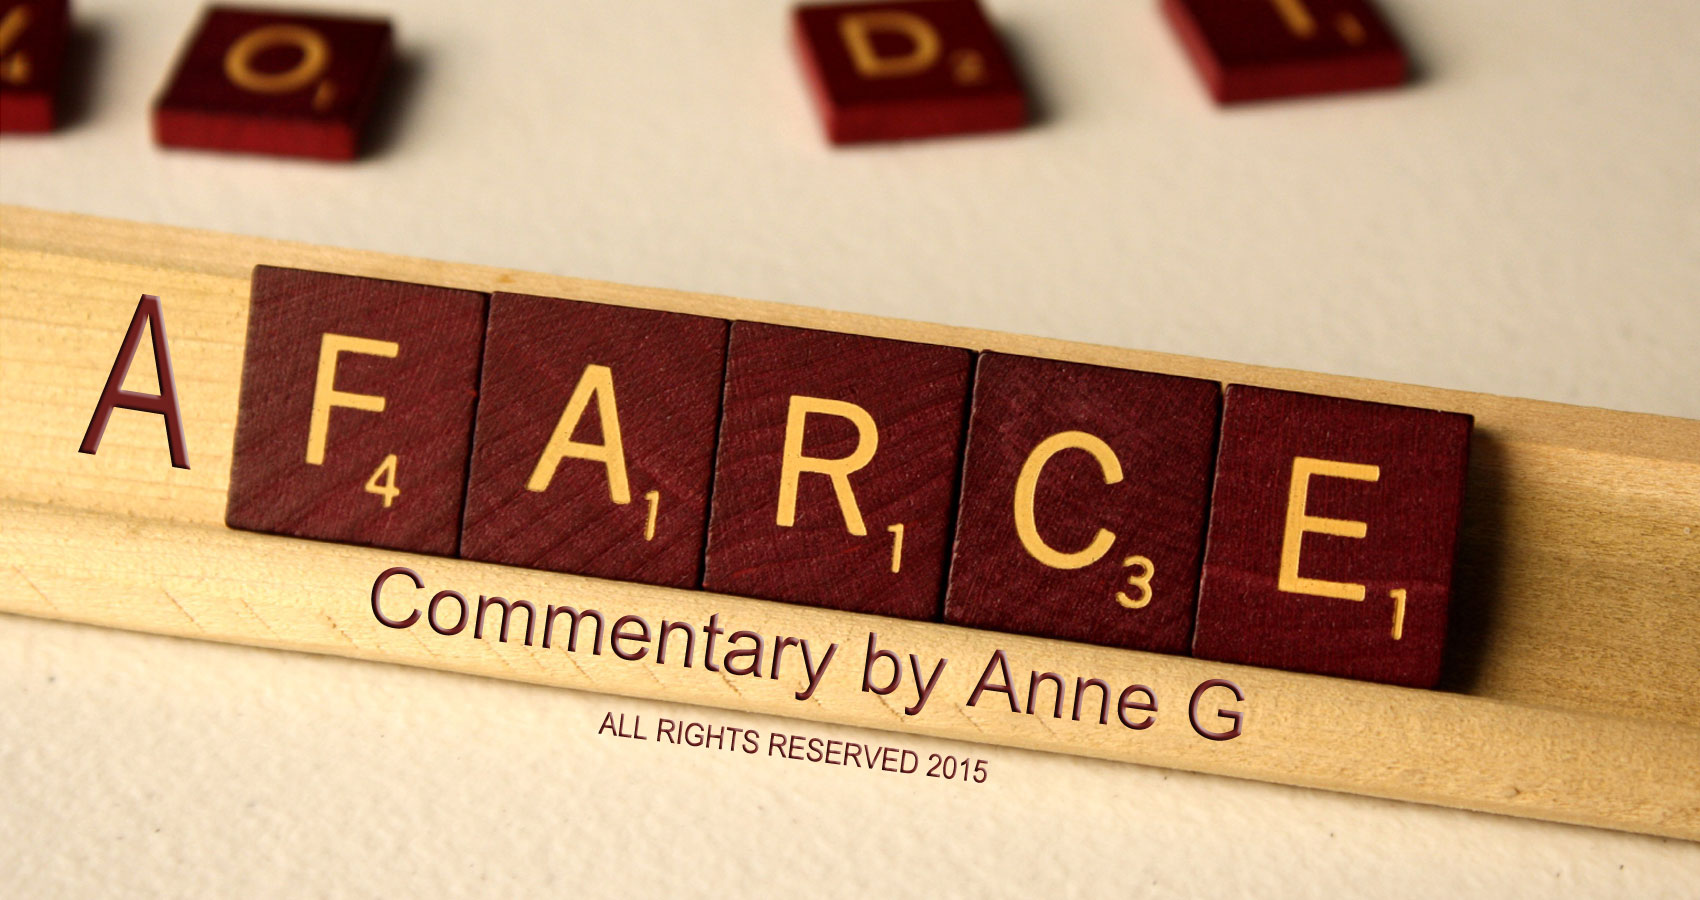 A Farce at spillwords.com by Anne G